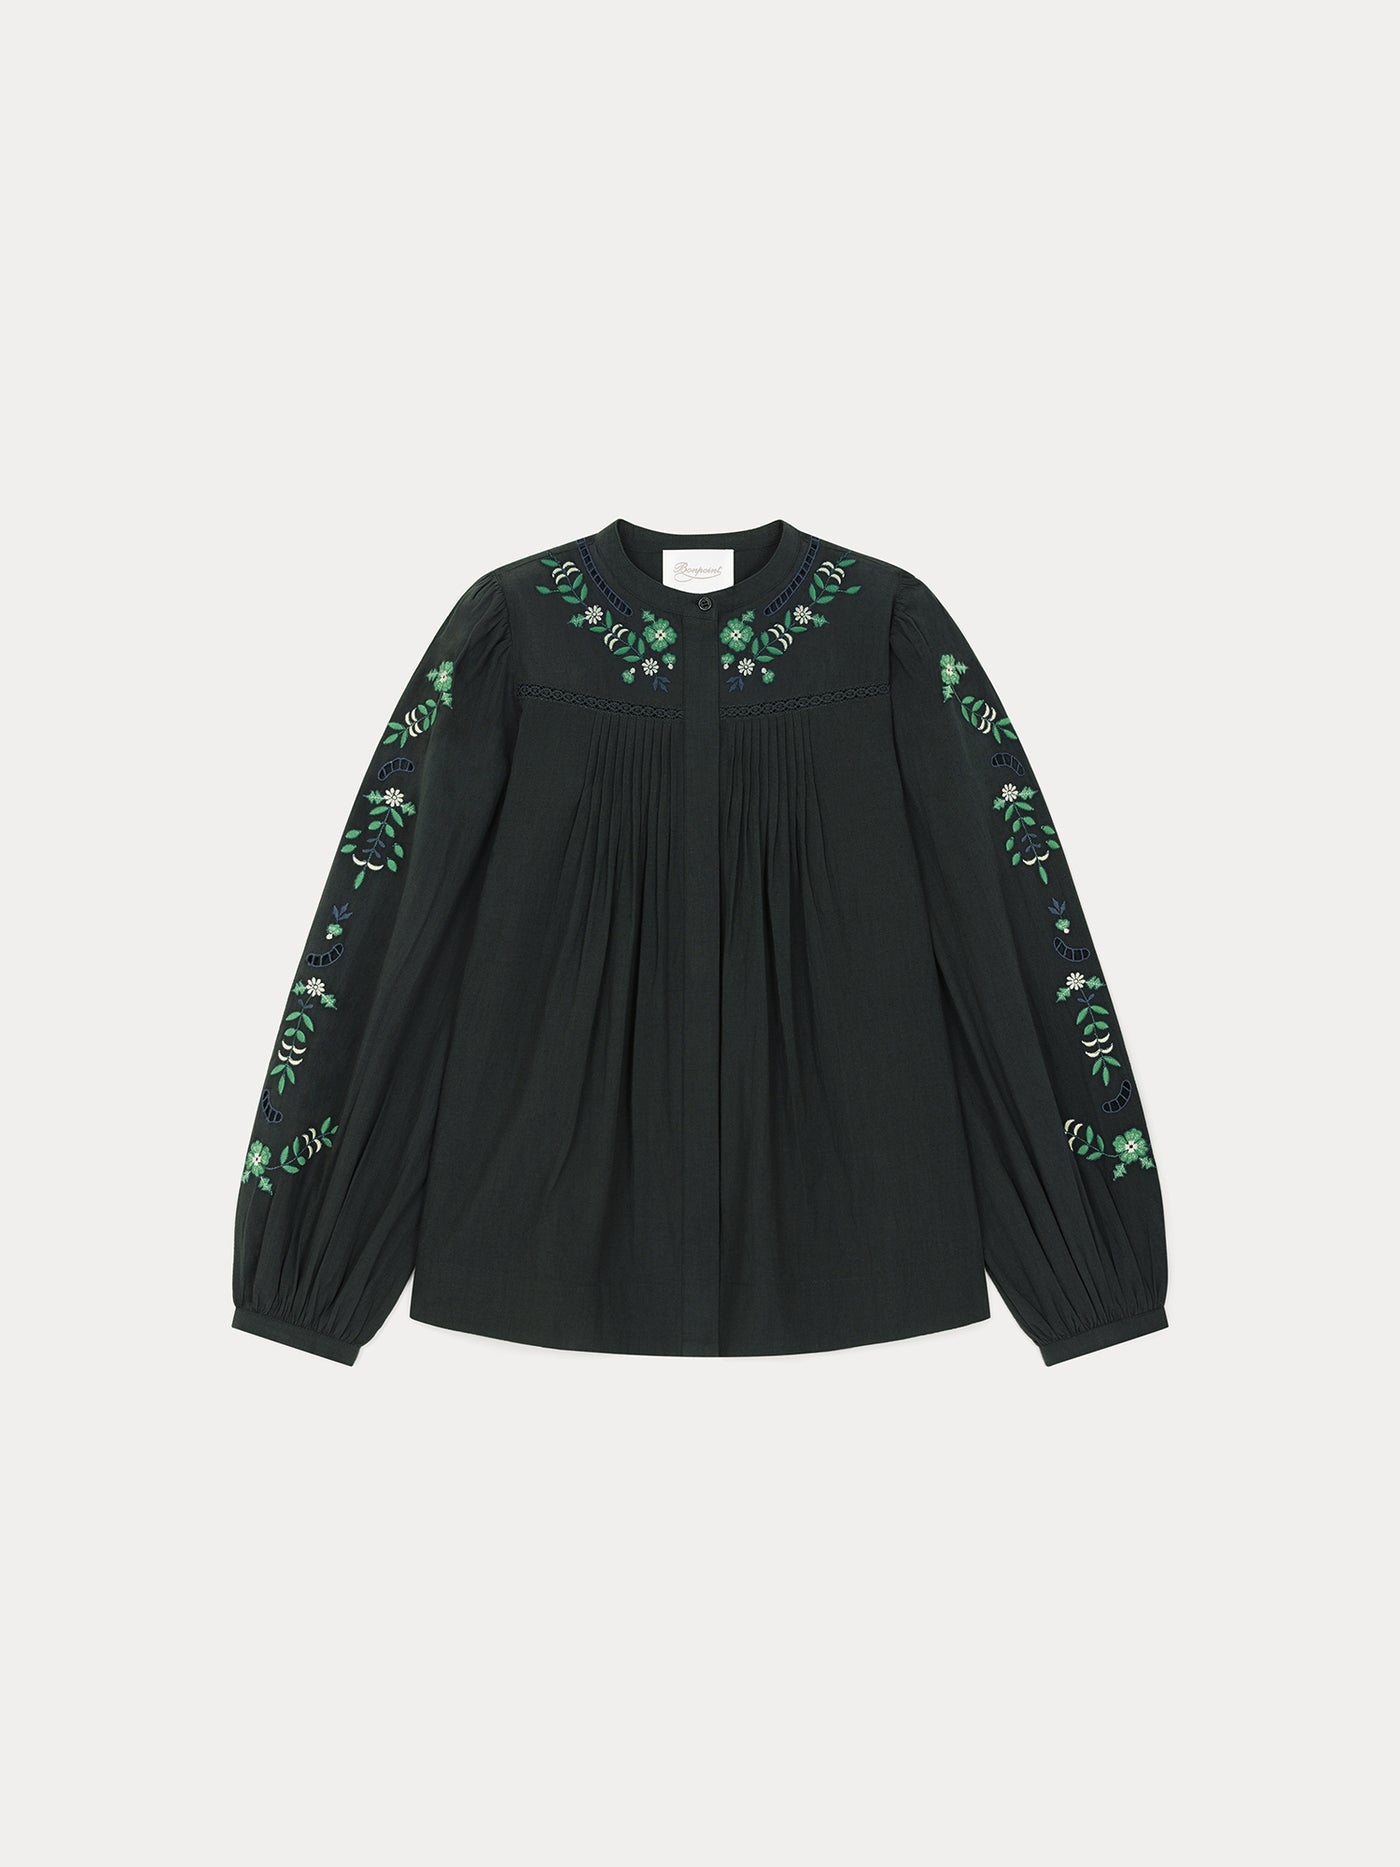 Cotton blouse with green and gray flower embroirdery